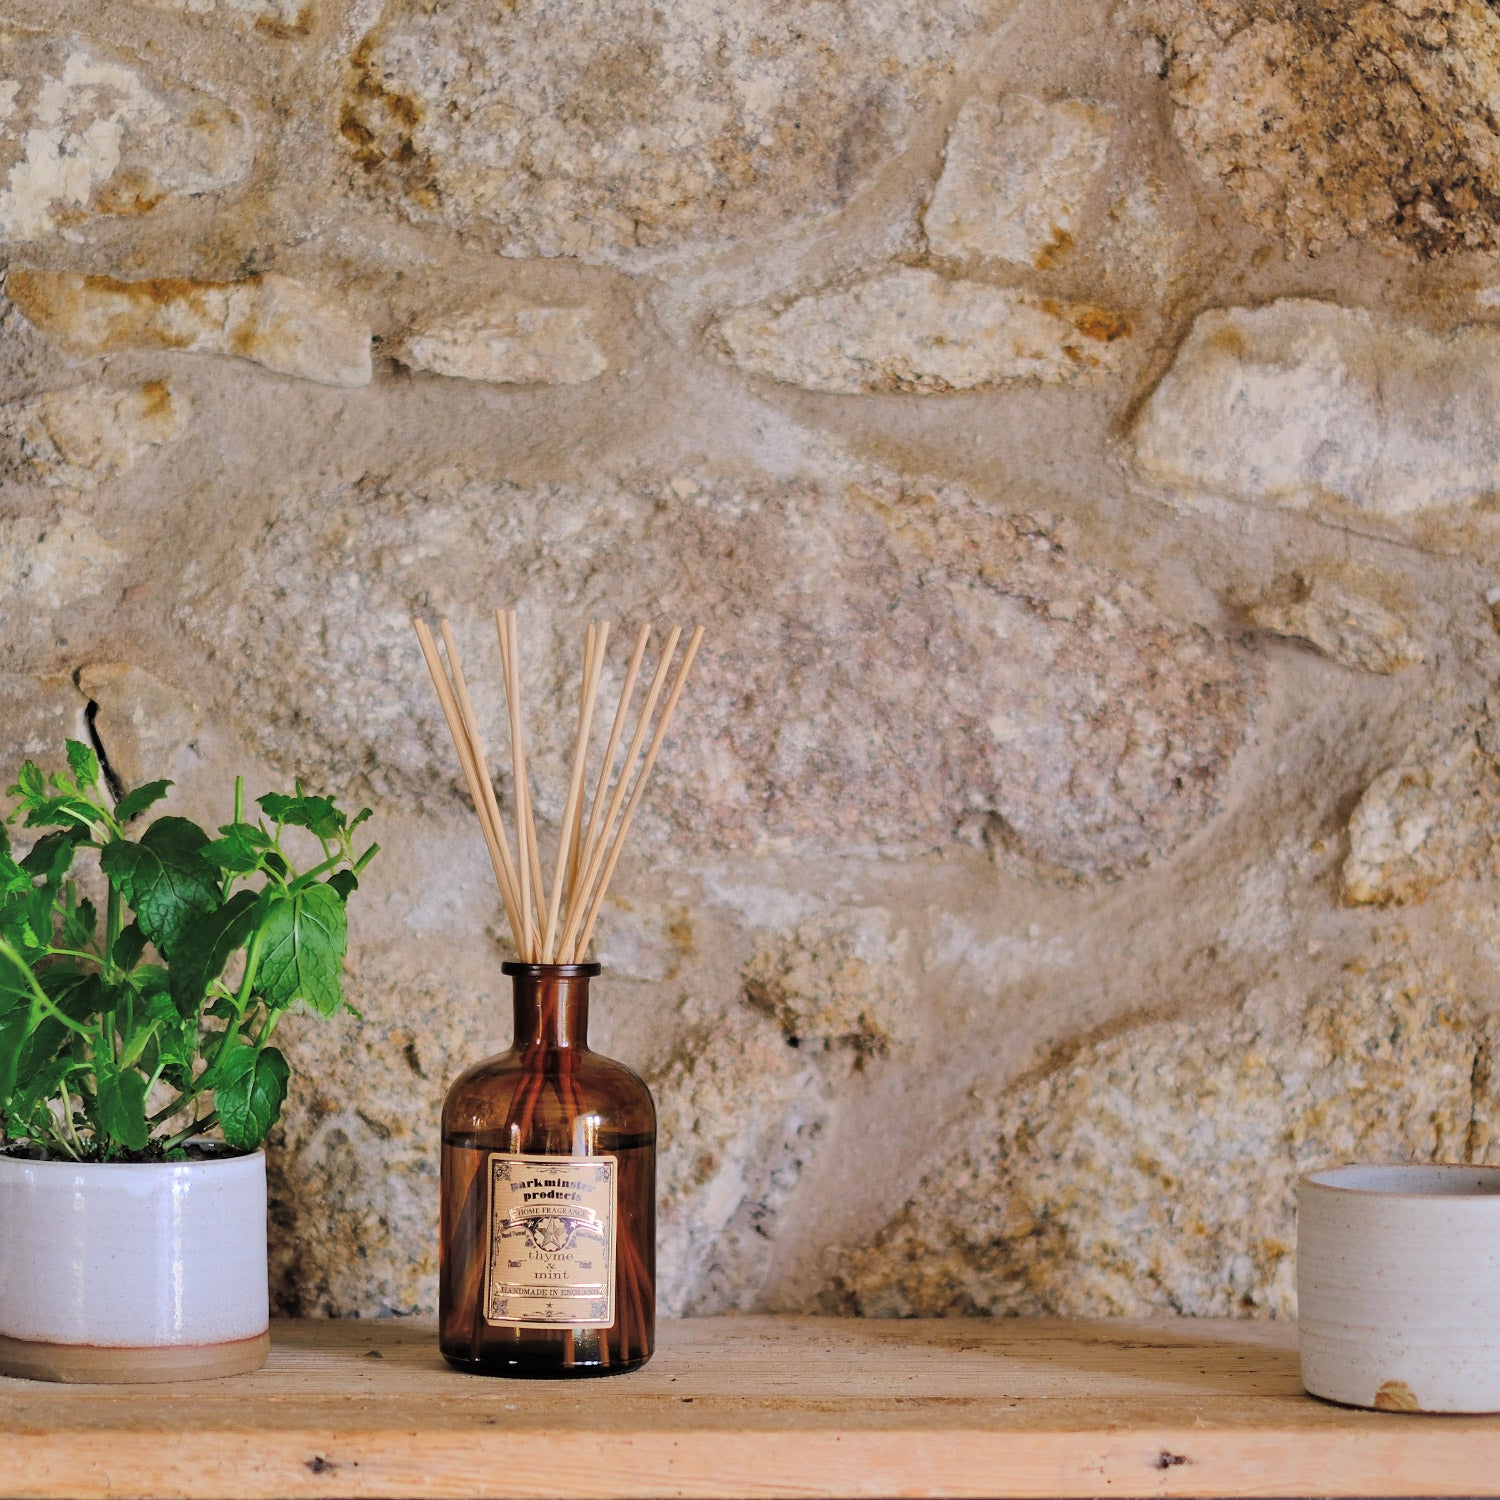 Revitalize your space with the excitingly fresh and herbal scent of Thyme & Mint using Parkminster's 200ml amber glass Apothecary Reed Diffuser. Handcrafted in our Cornish workshop, this diffuser combines stylish contemporary glassware with 100% plant-based ingredients for a refreshing aroma